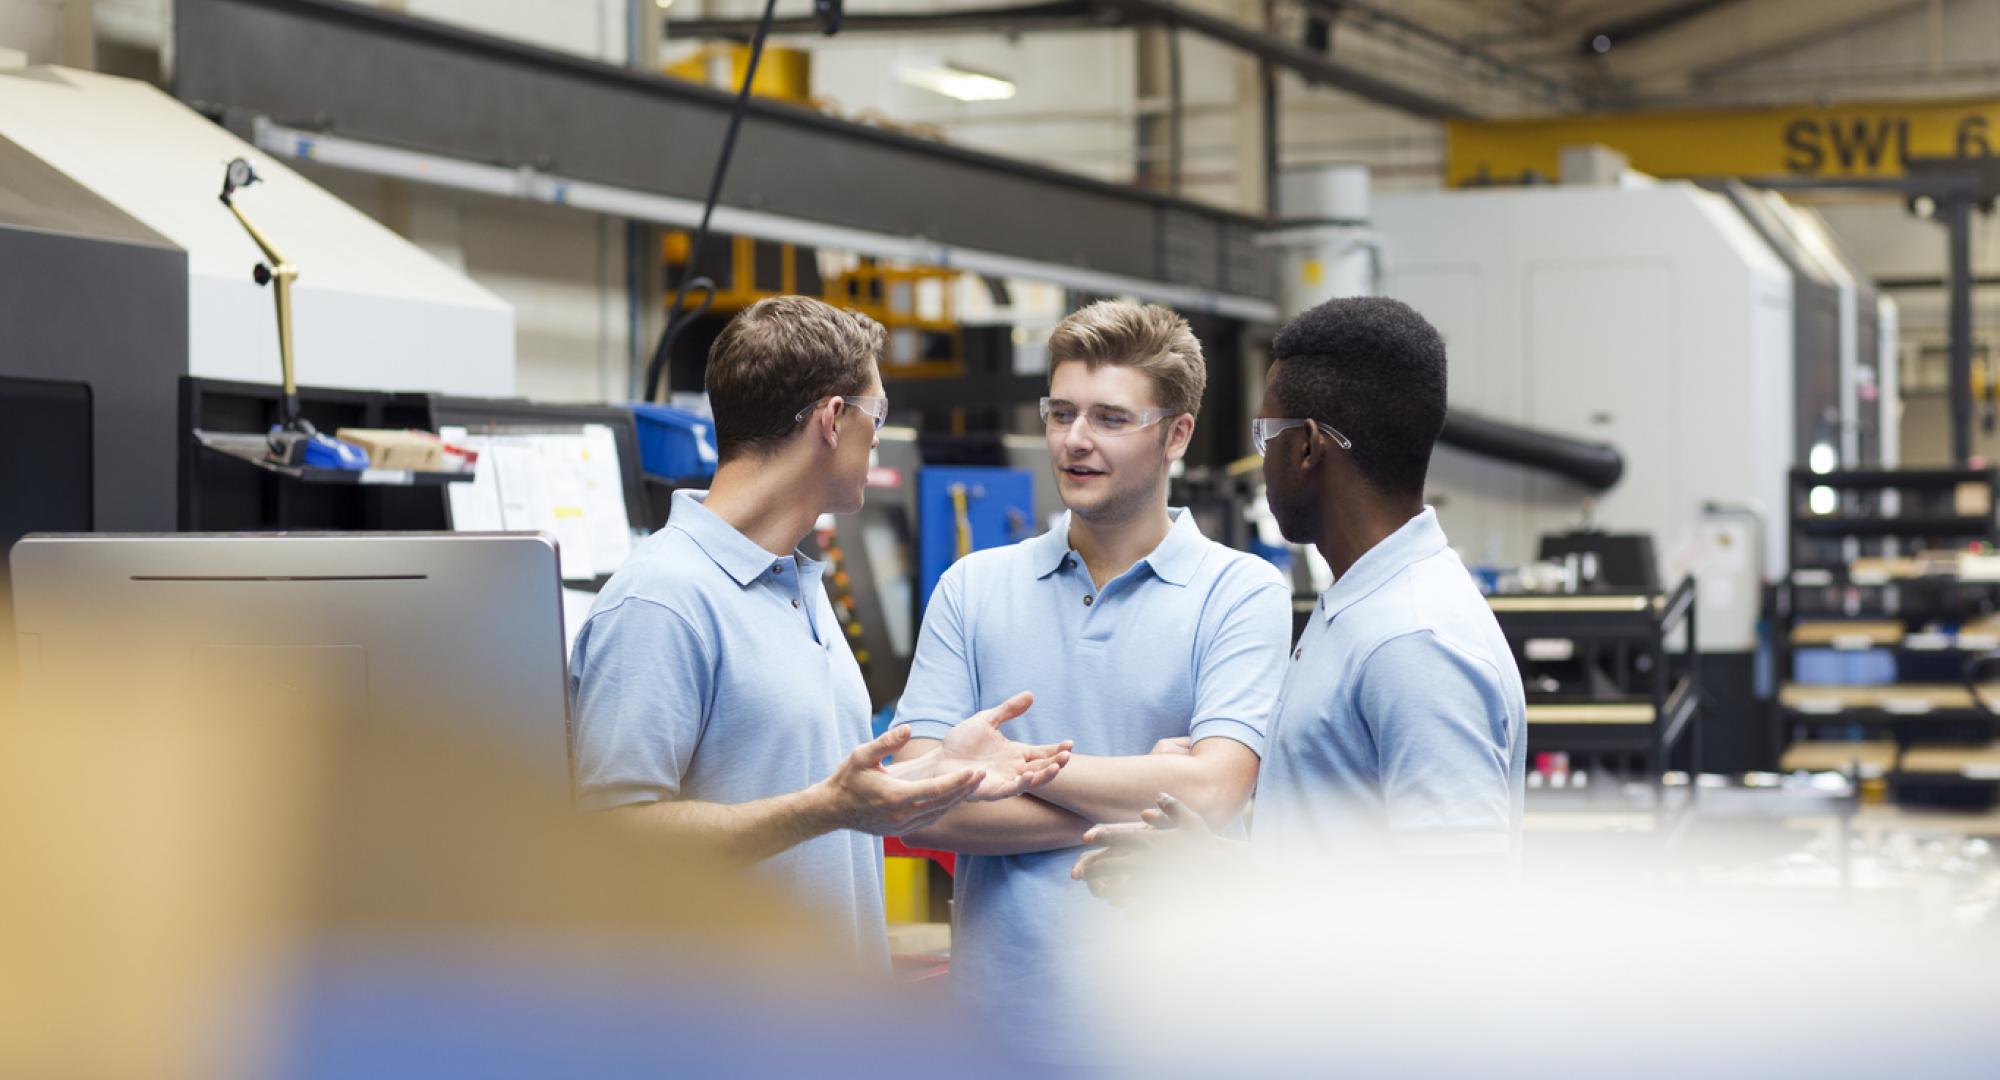 Three male apprentices discussing something